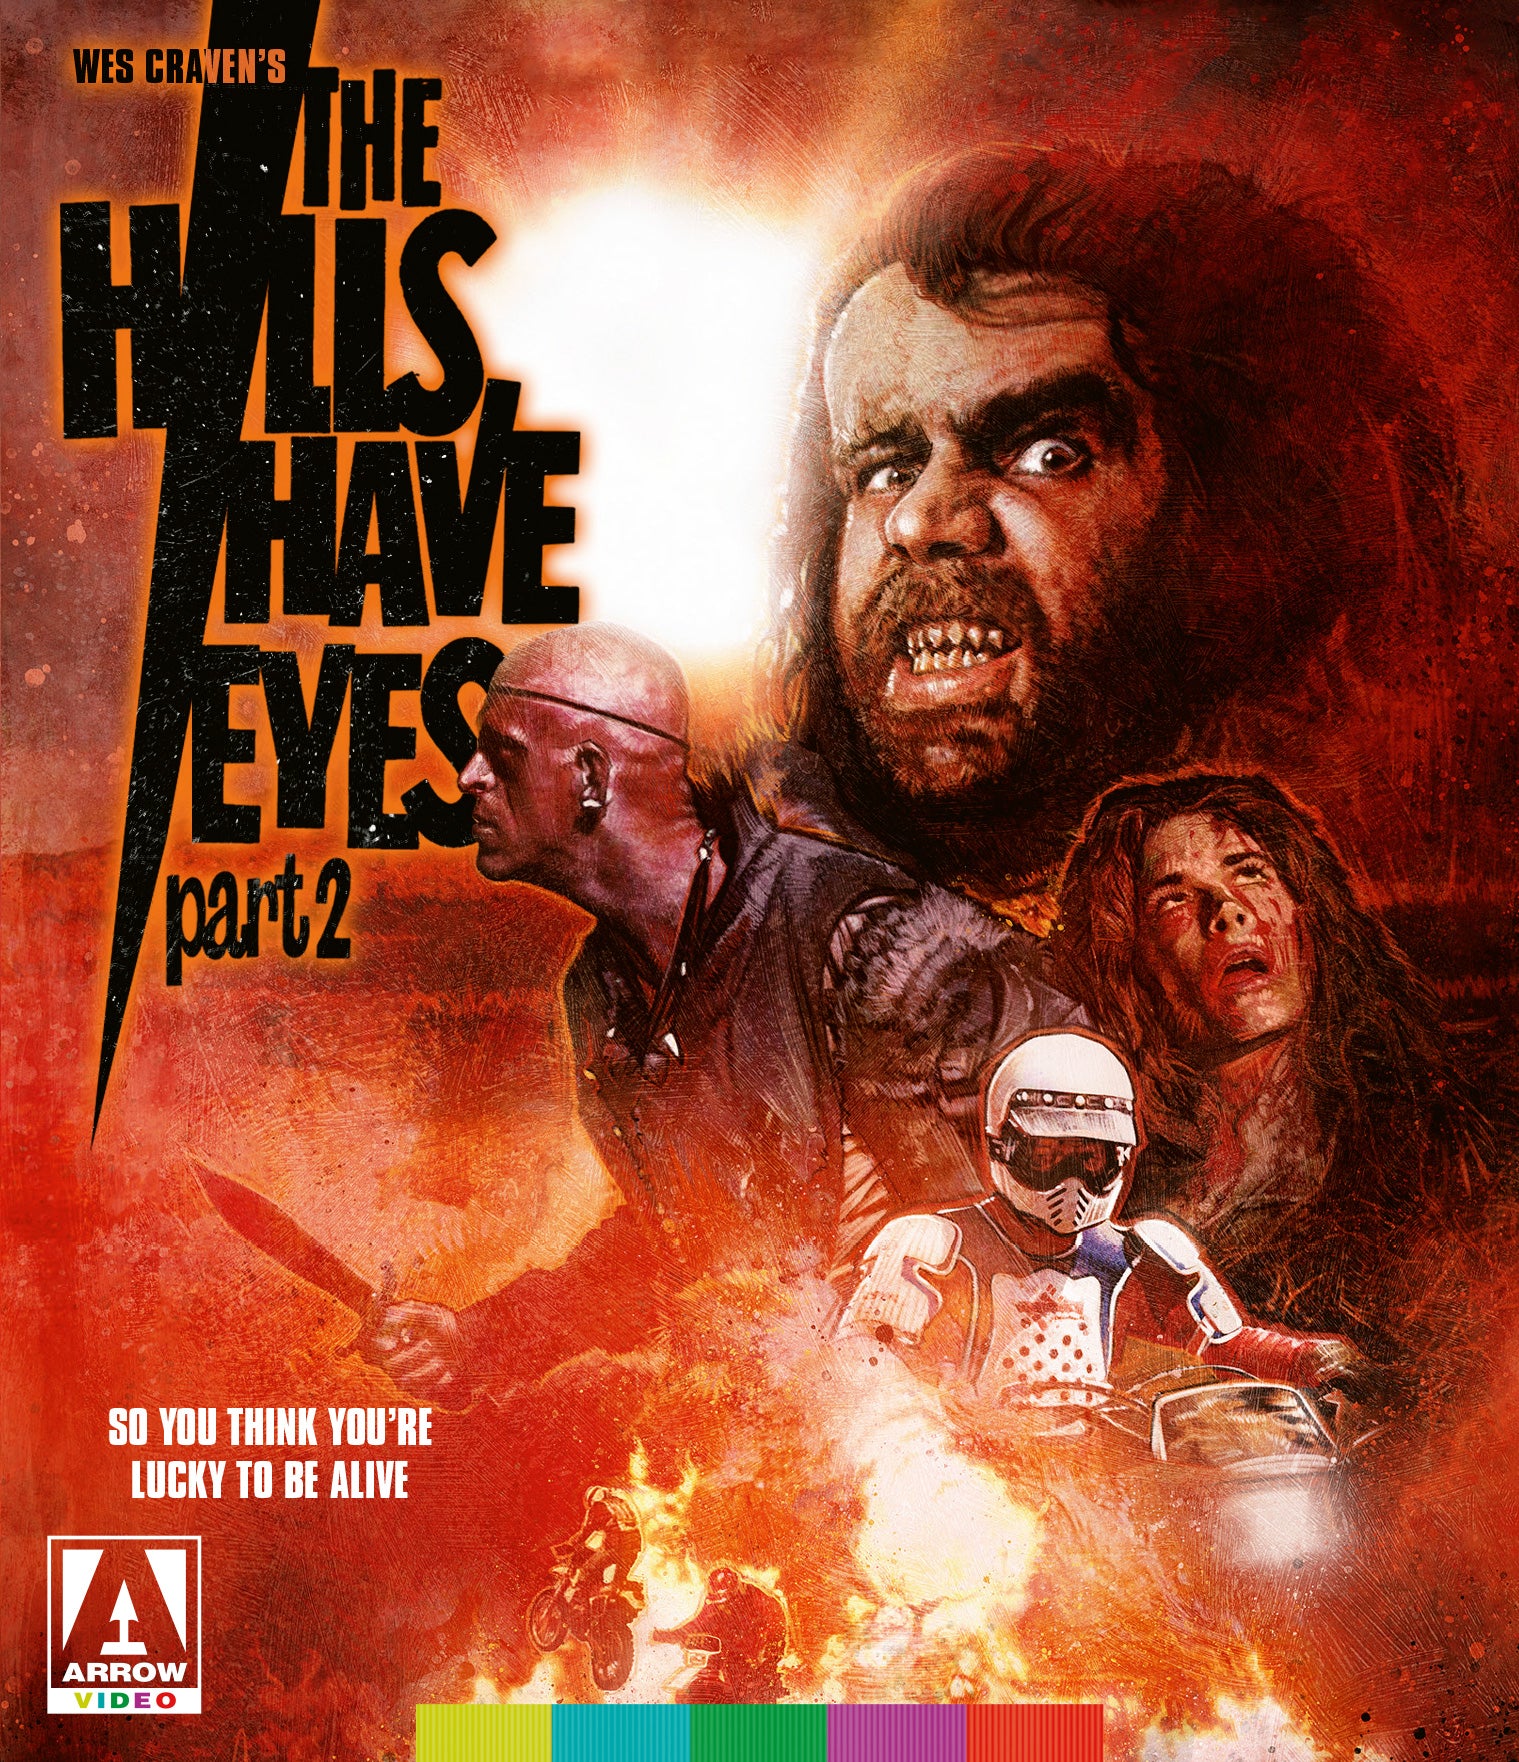 THE HILLS HAVE EYES PART 2 BLU-RAY